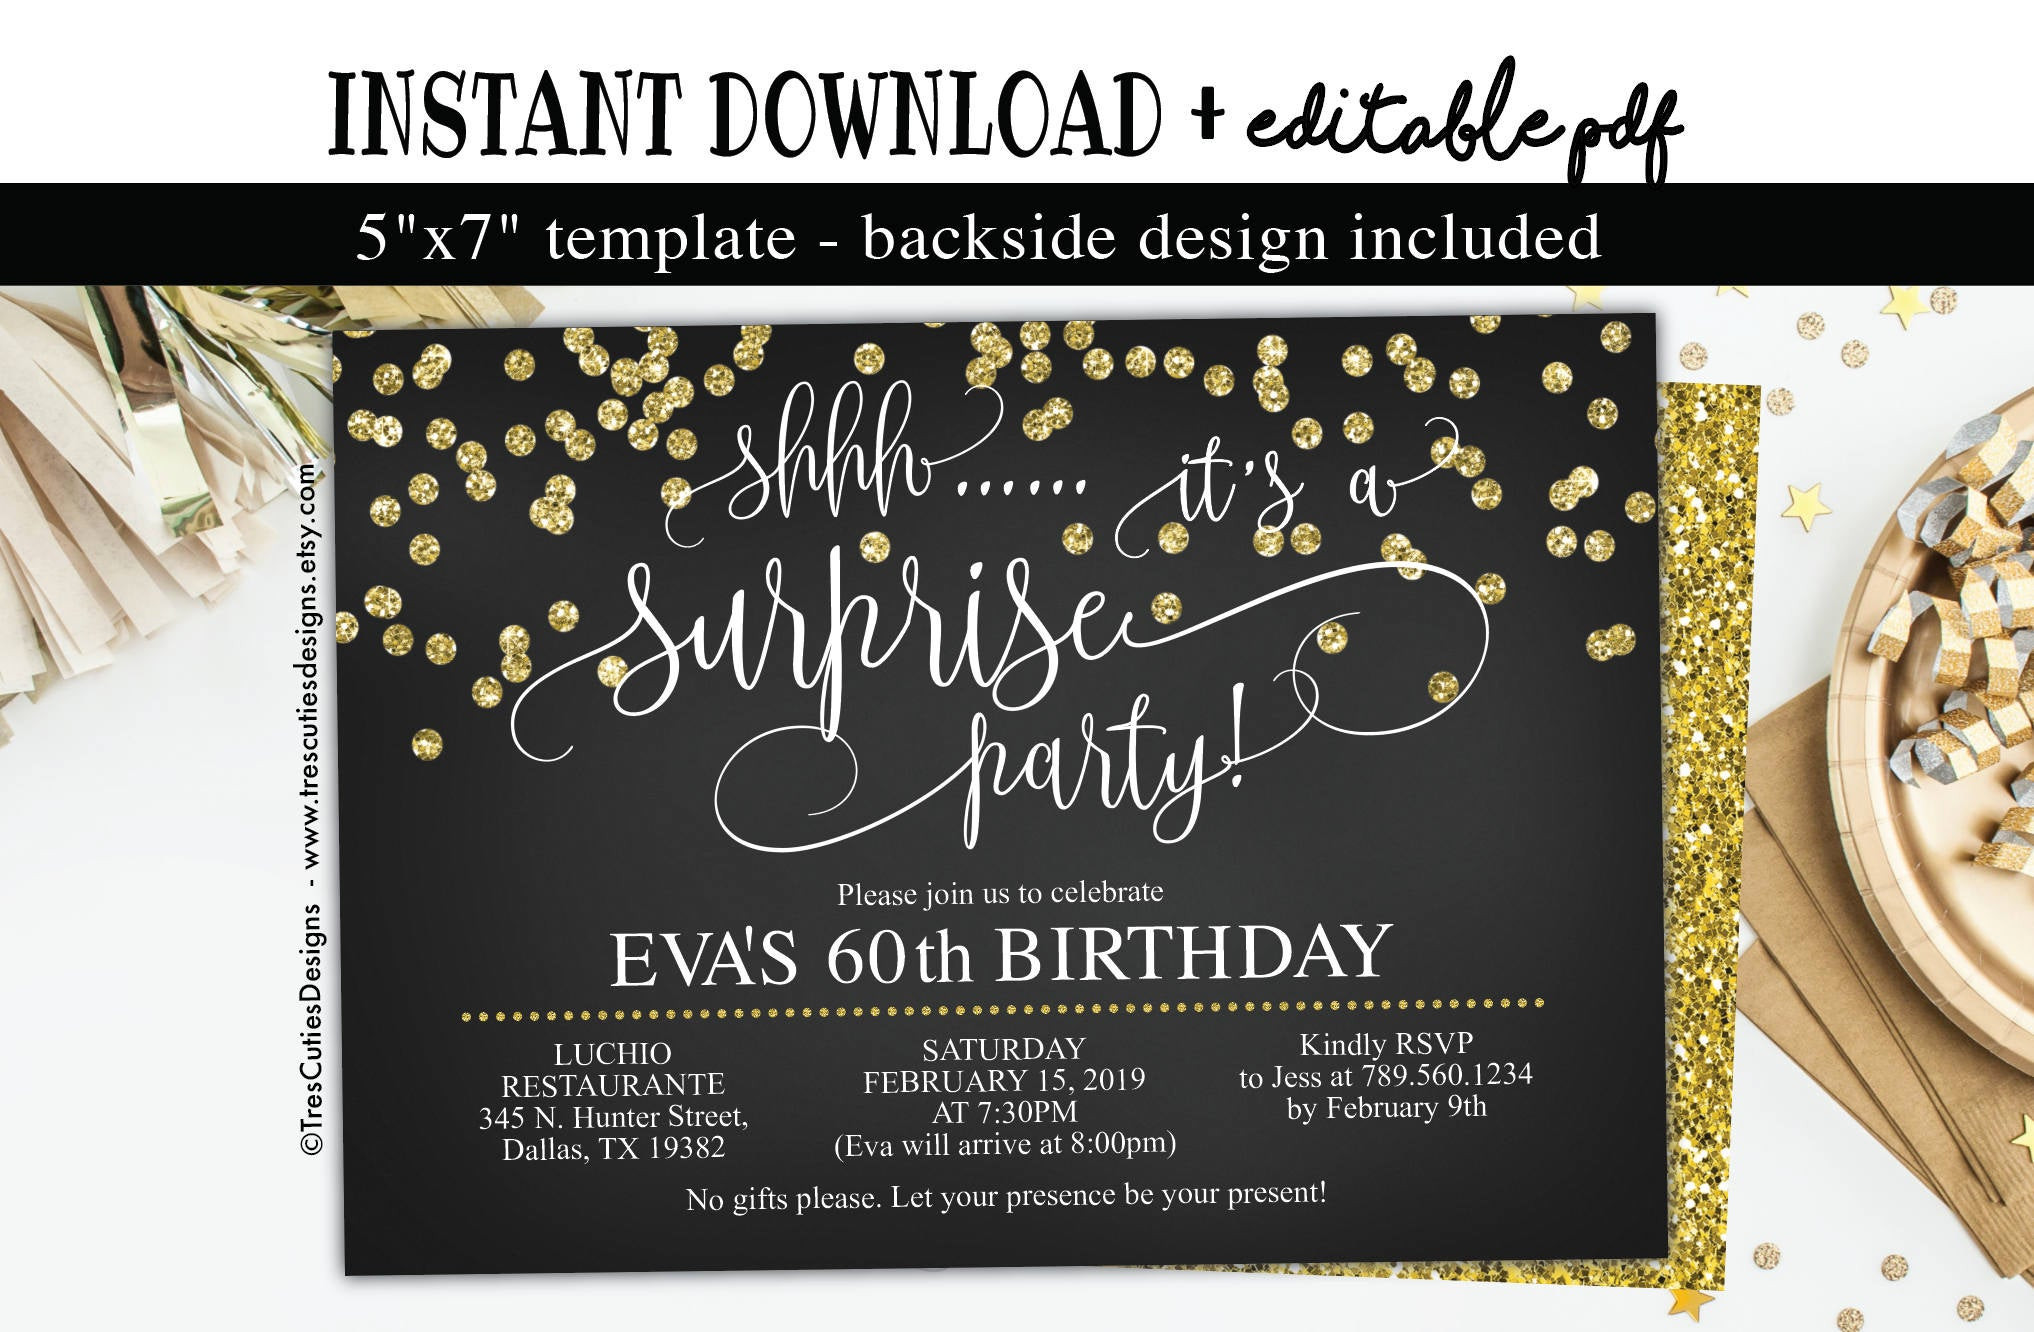 Surprise 60th Birthday Party Invitations
 Surprise birthday invitation 60th birthday Party Black